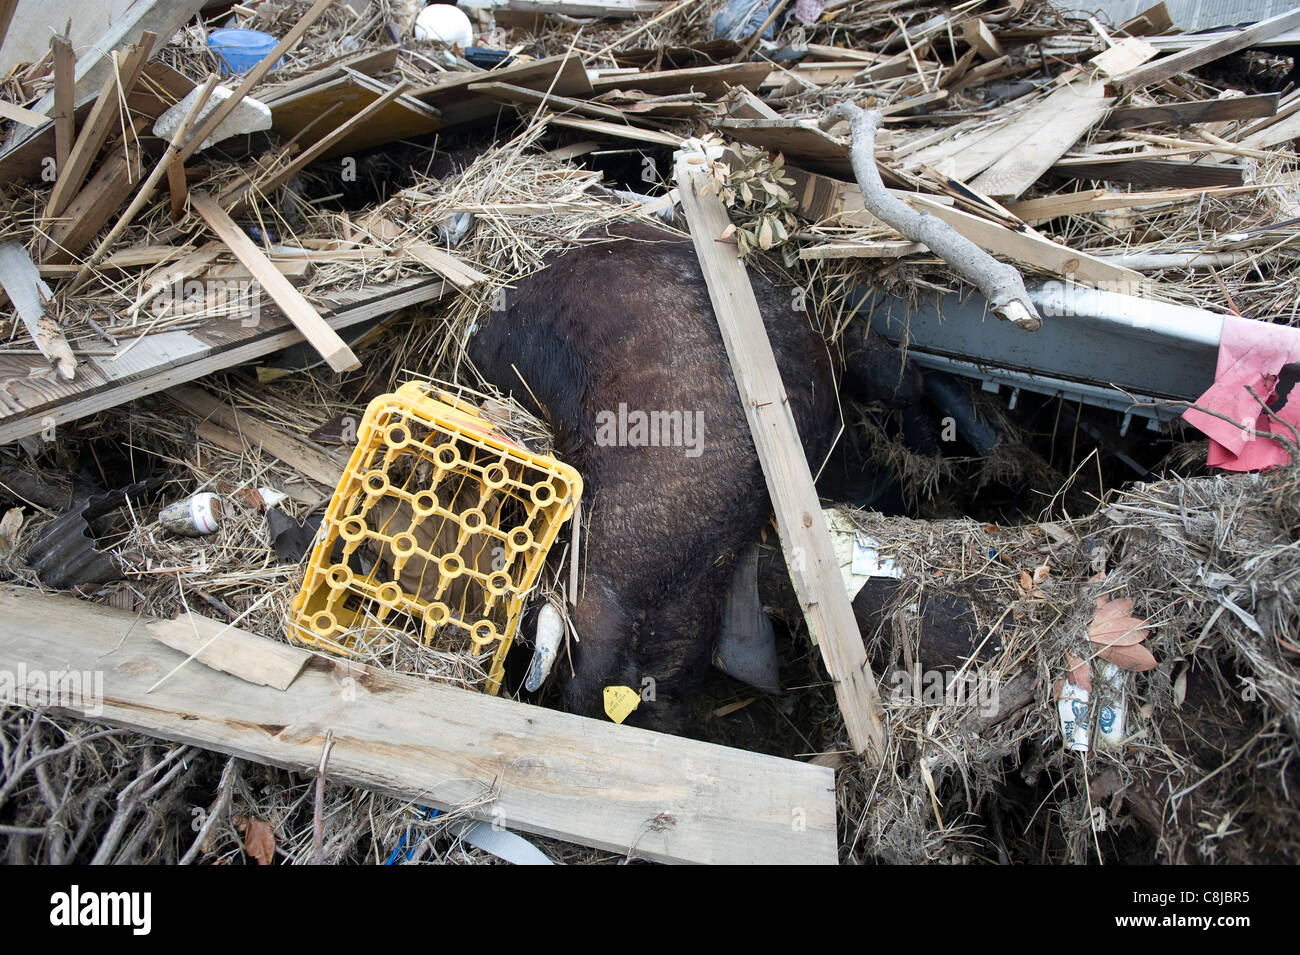 A dead cow lies among the rubble in Naraha, a town that lies within the evacuation zone around the leaking nuclear plant, Japan Stock Photo